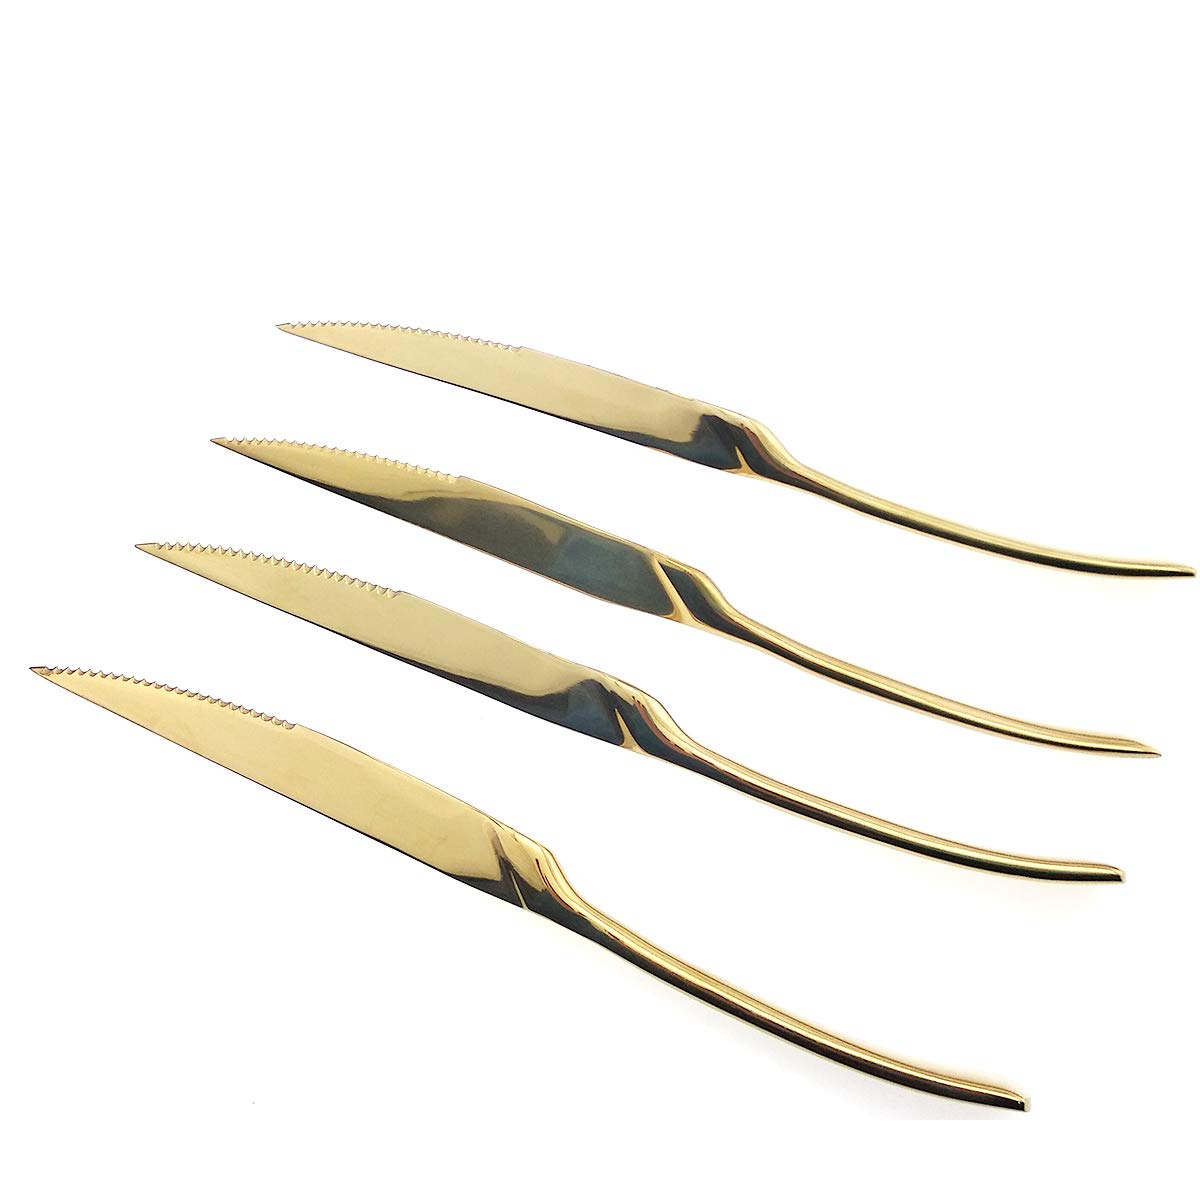 Uniturck Steak Knives 18/10 Heavy-Duty Stainless Steel Steak Knife Set of 6 for Chefs Commercial Kitchen - Great For BBQ Weddings - Dinners - Parties All Homes & Kitchens (Mirror Polished Gold)